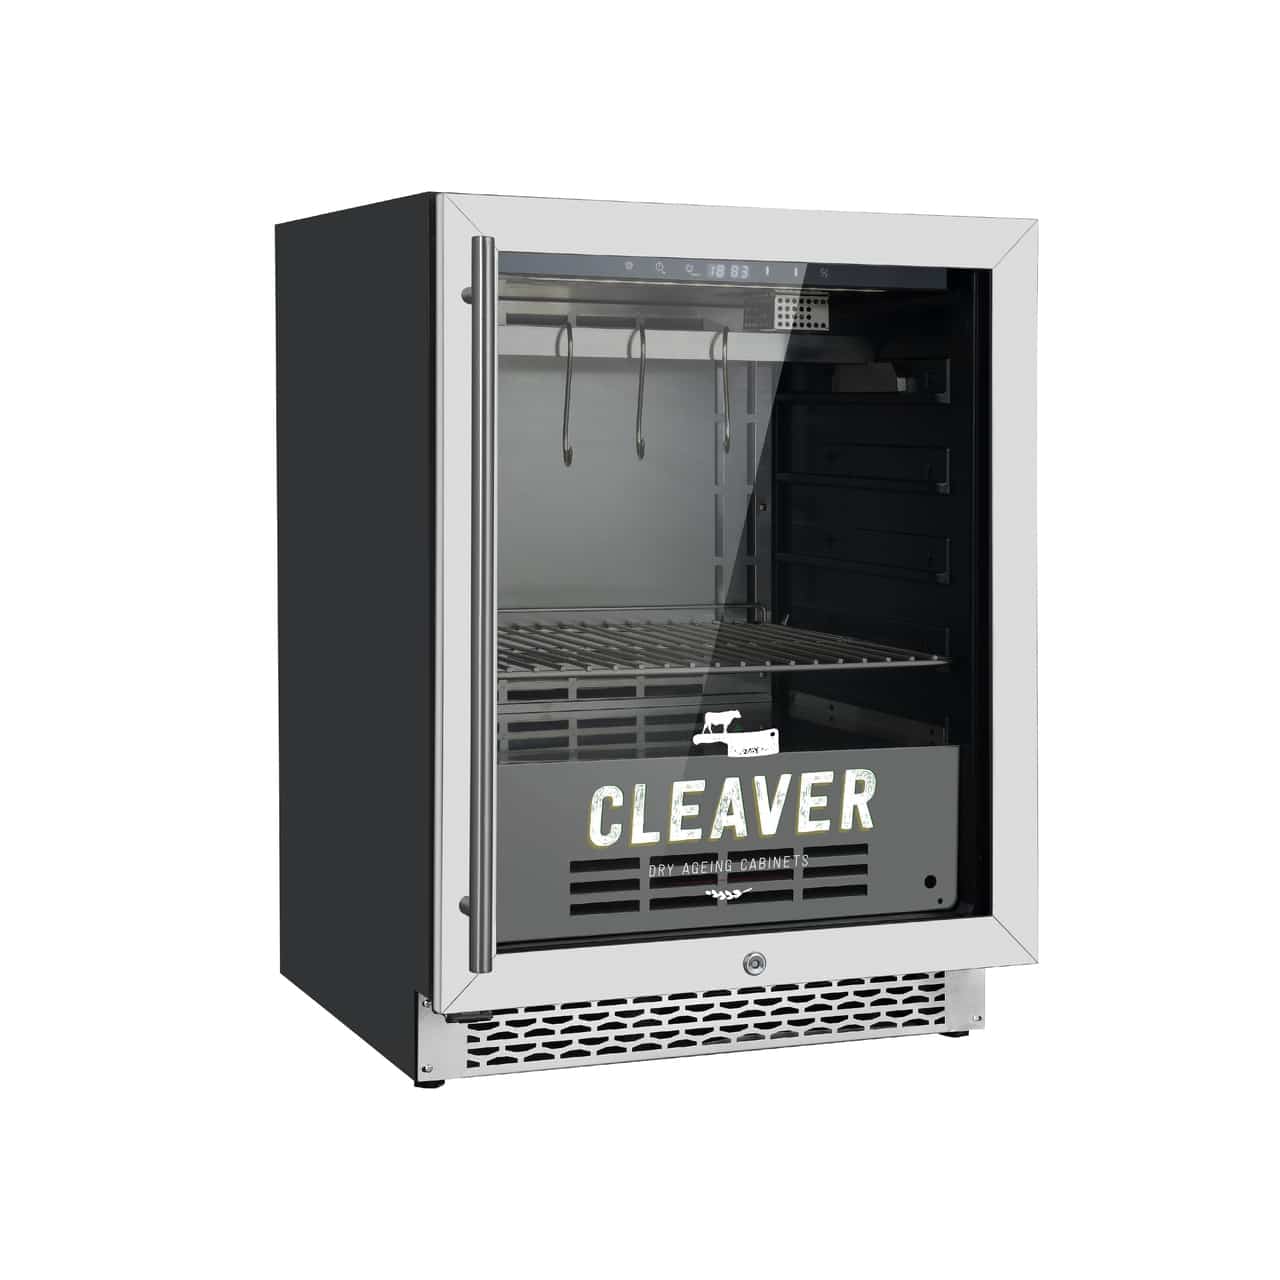 products CLEAVER Dry Ageing Cabinets2  31657.1566795915.1280.1280